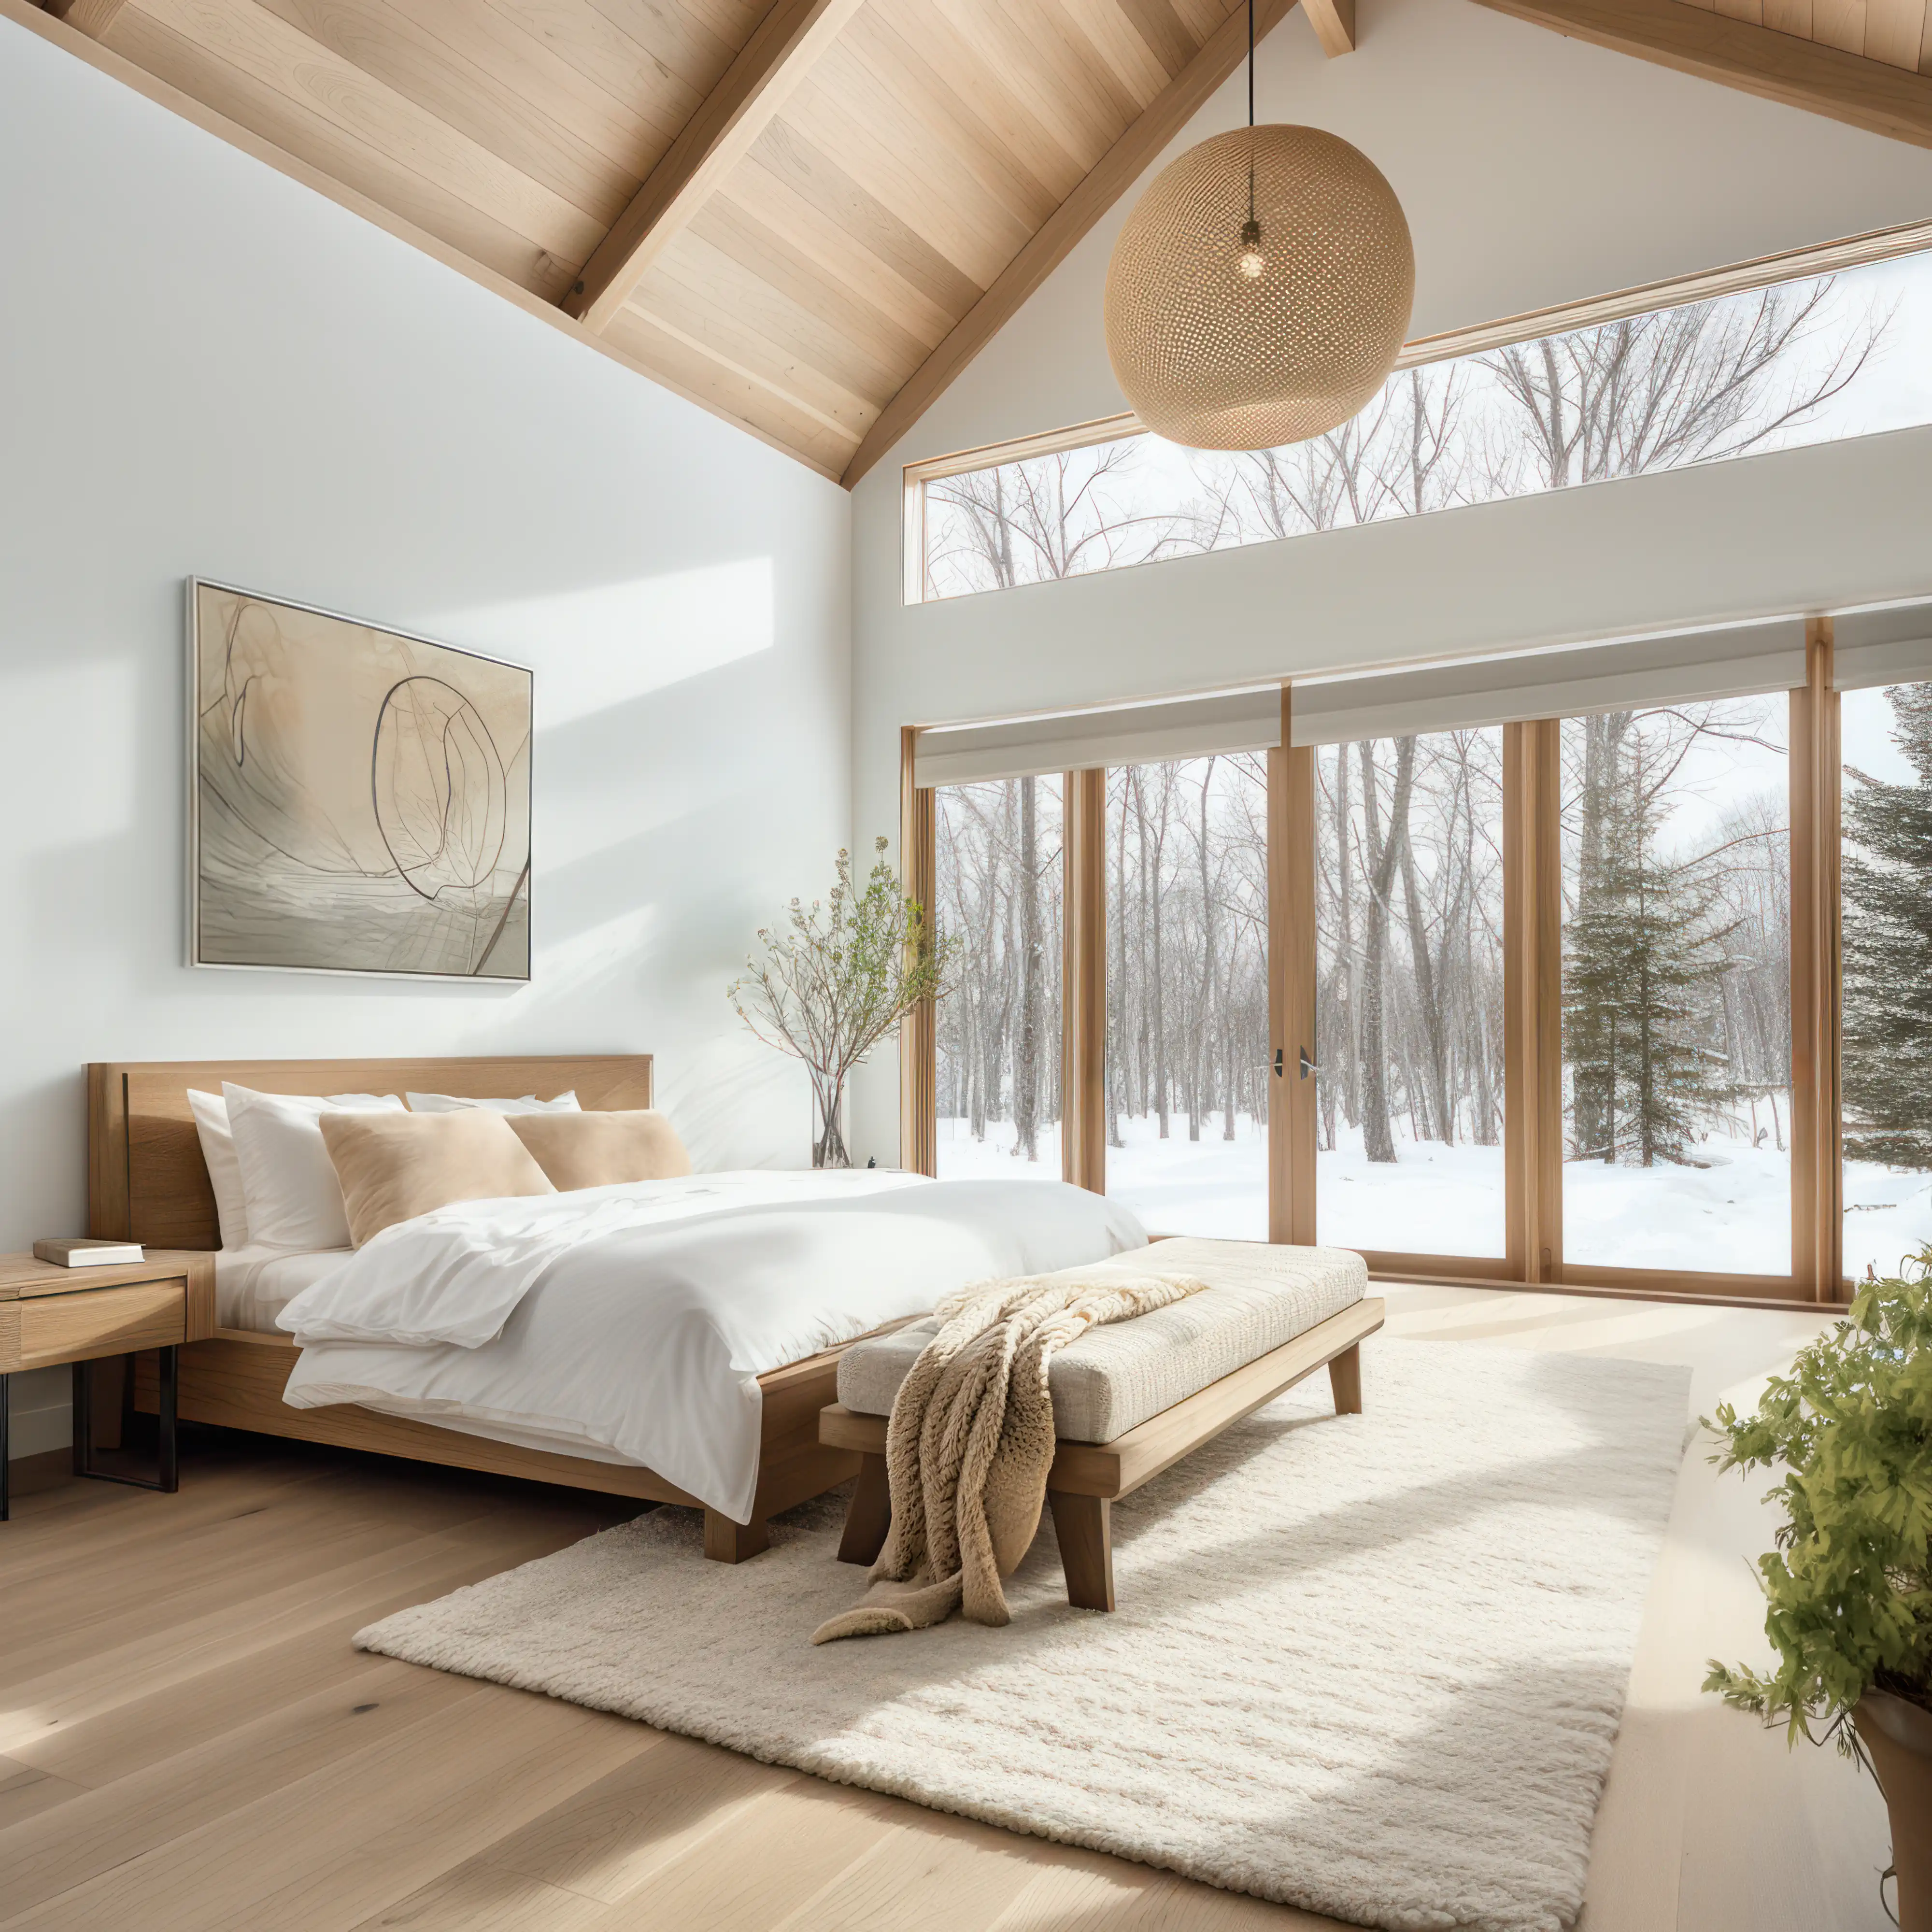 Spacious modern bedroom with wooden accents overlooking a snowy forest, interior by Sarah Brown Design